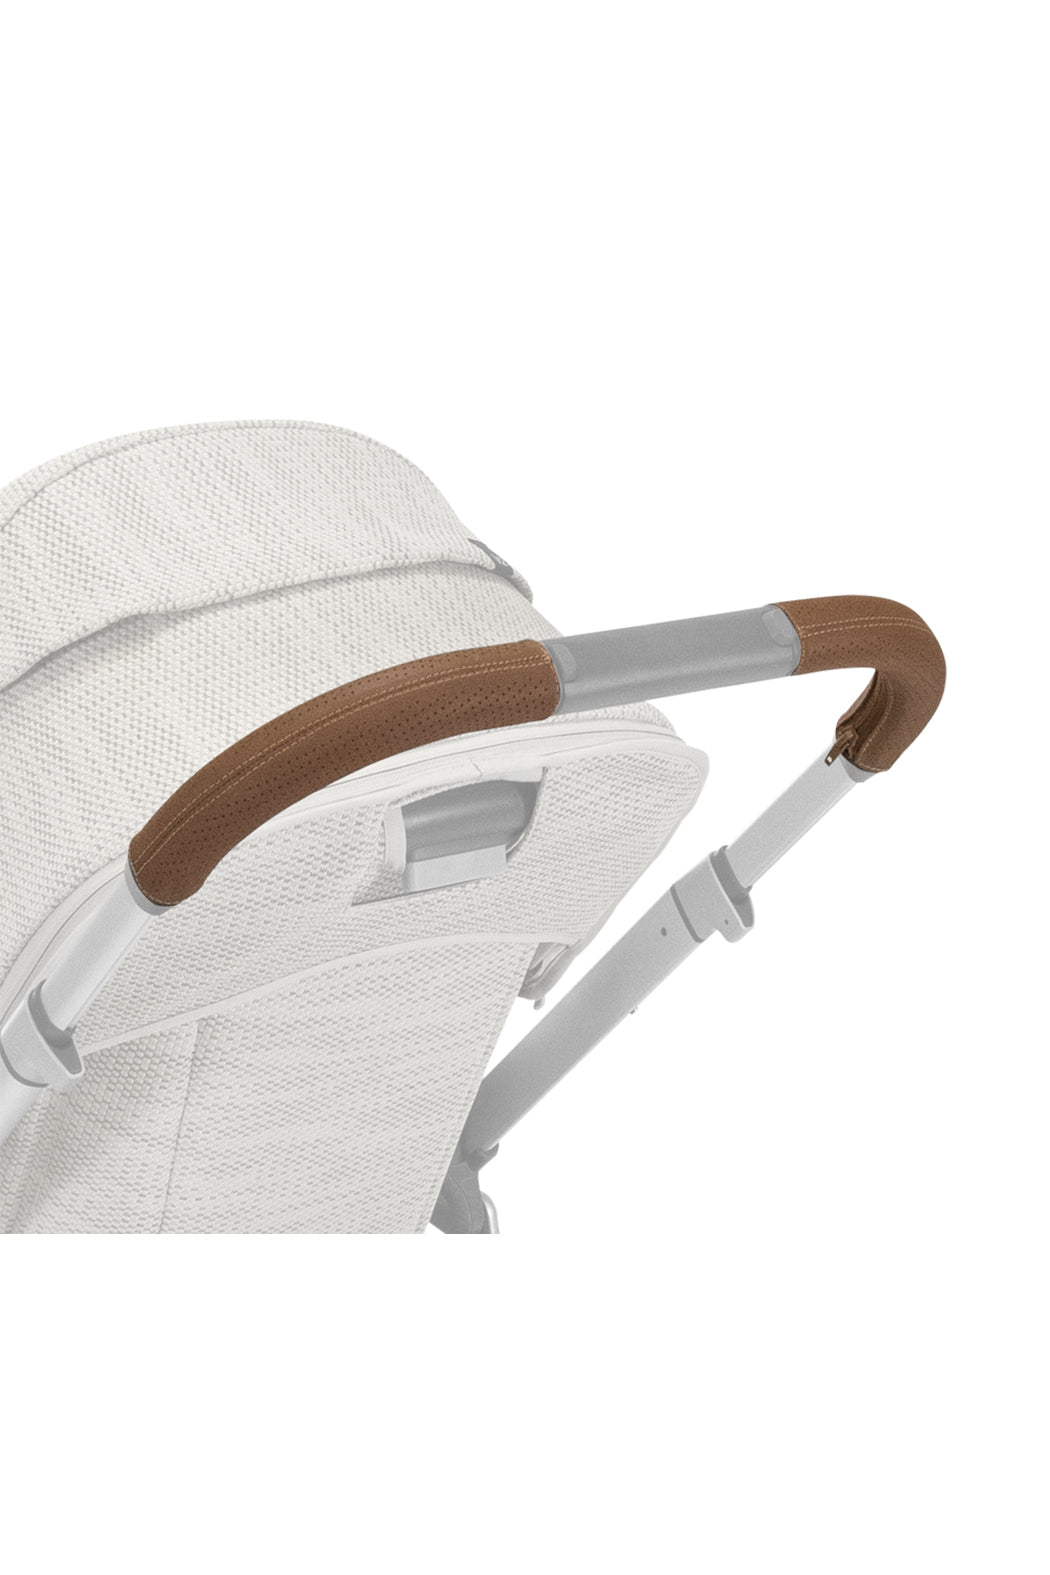 UPPAbaby Leather Handlebar Covers for Vista (models 2015-2019) and Vista V2